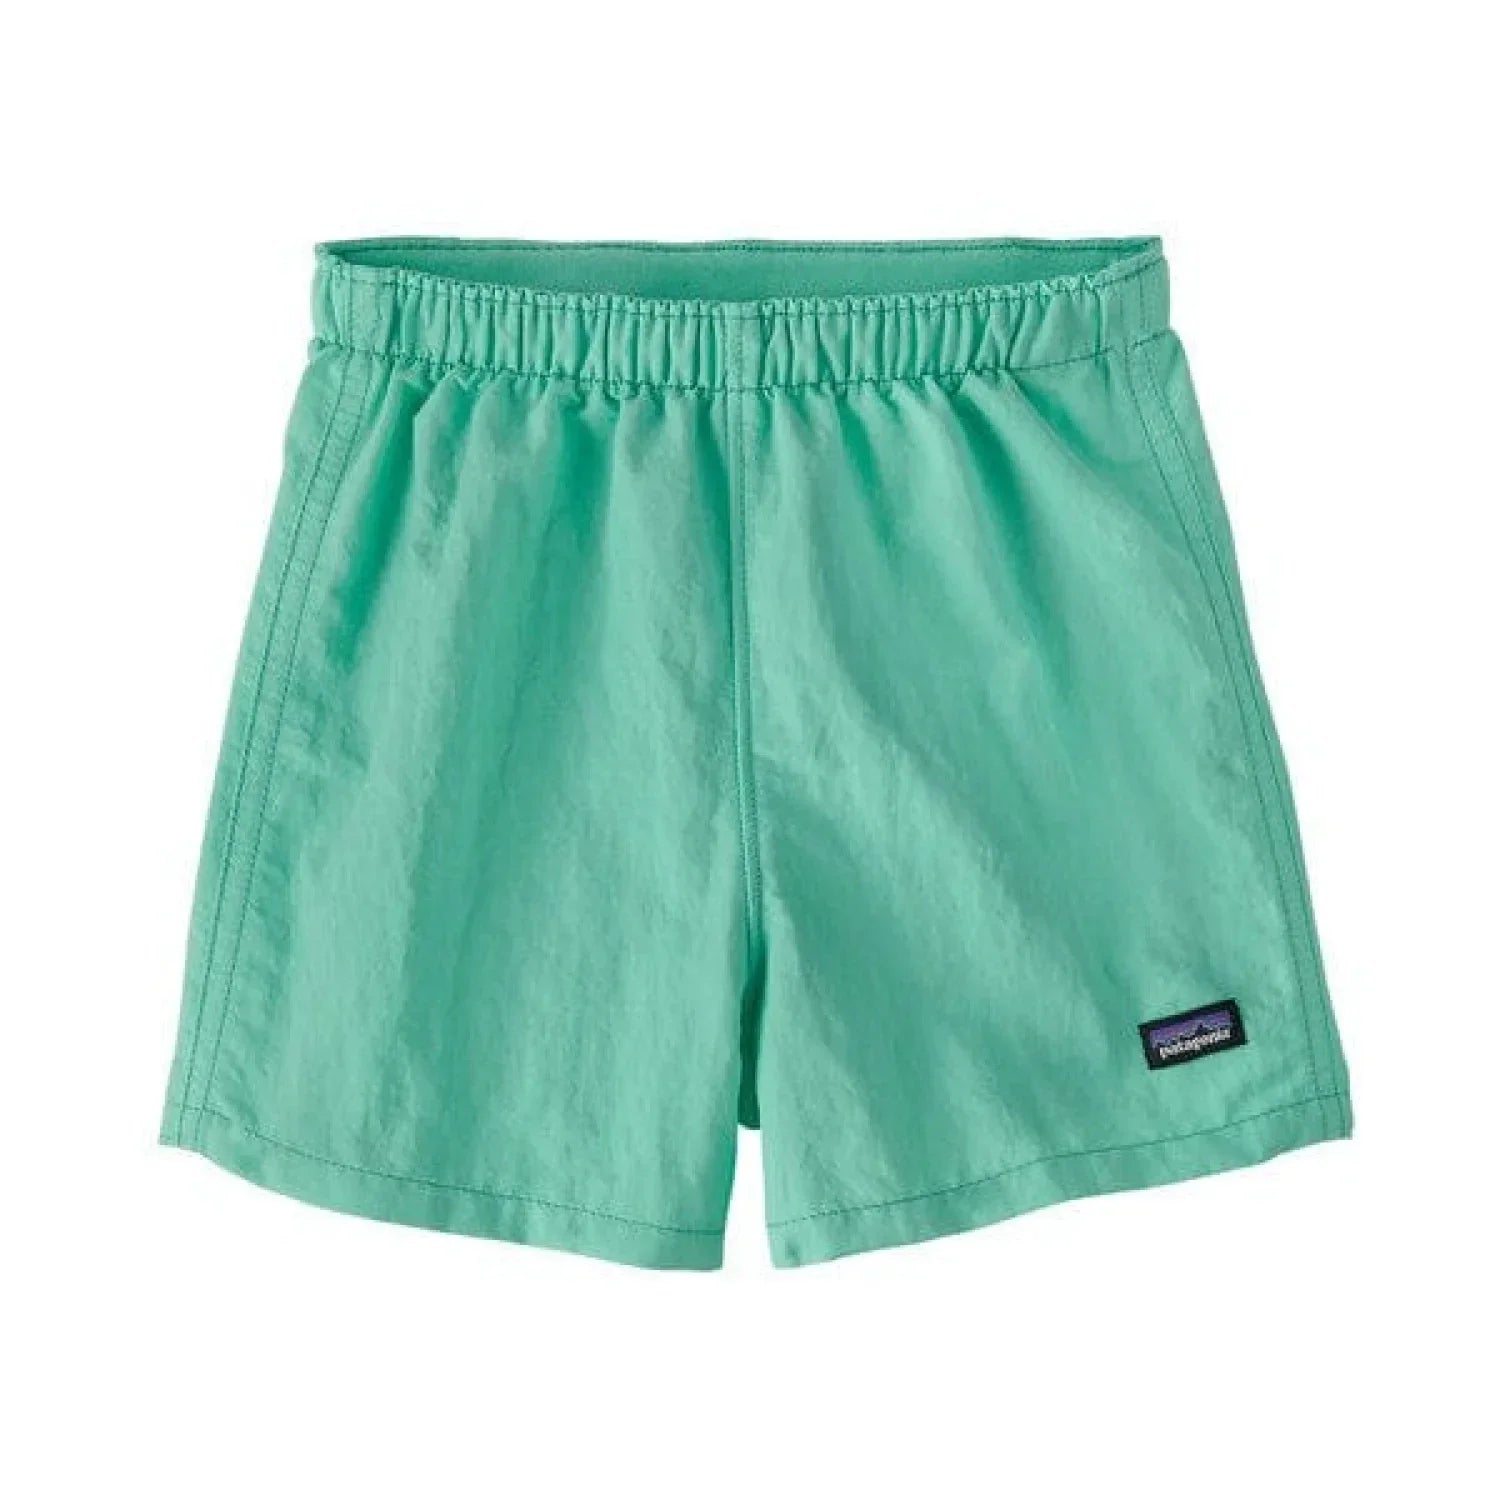 Patagonia KIDS|BABY - BABY - BABY BOTTOMS Baby Baggies Short ELYT EARLY TEAL